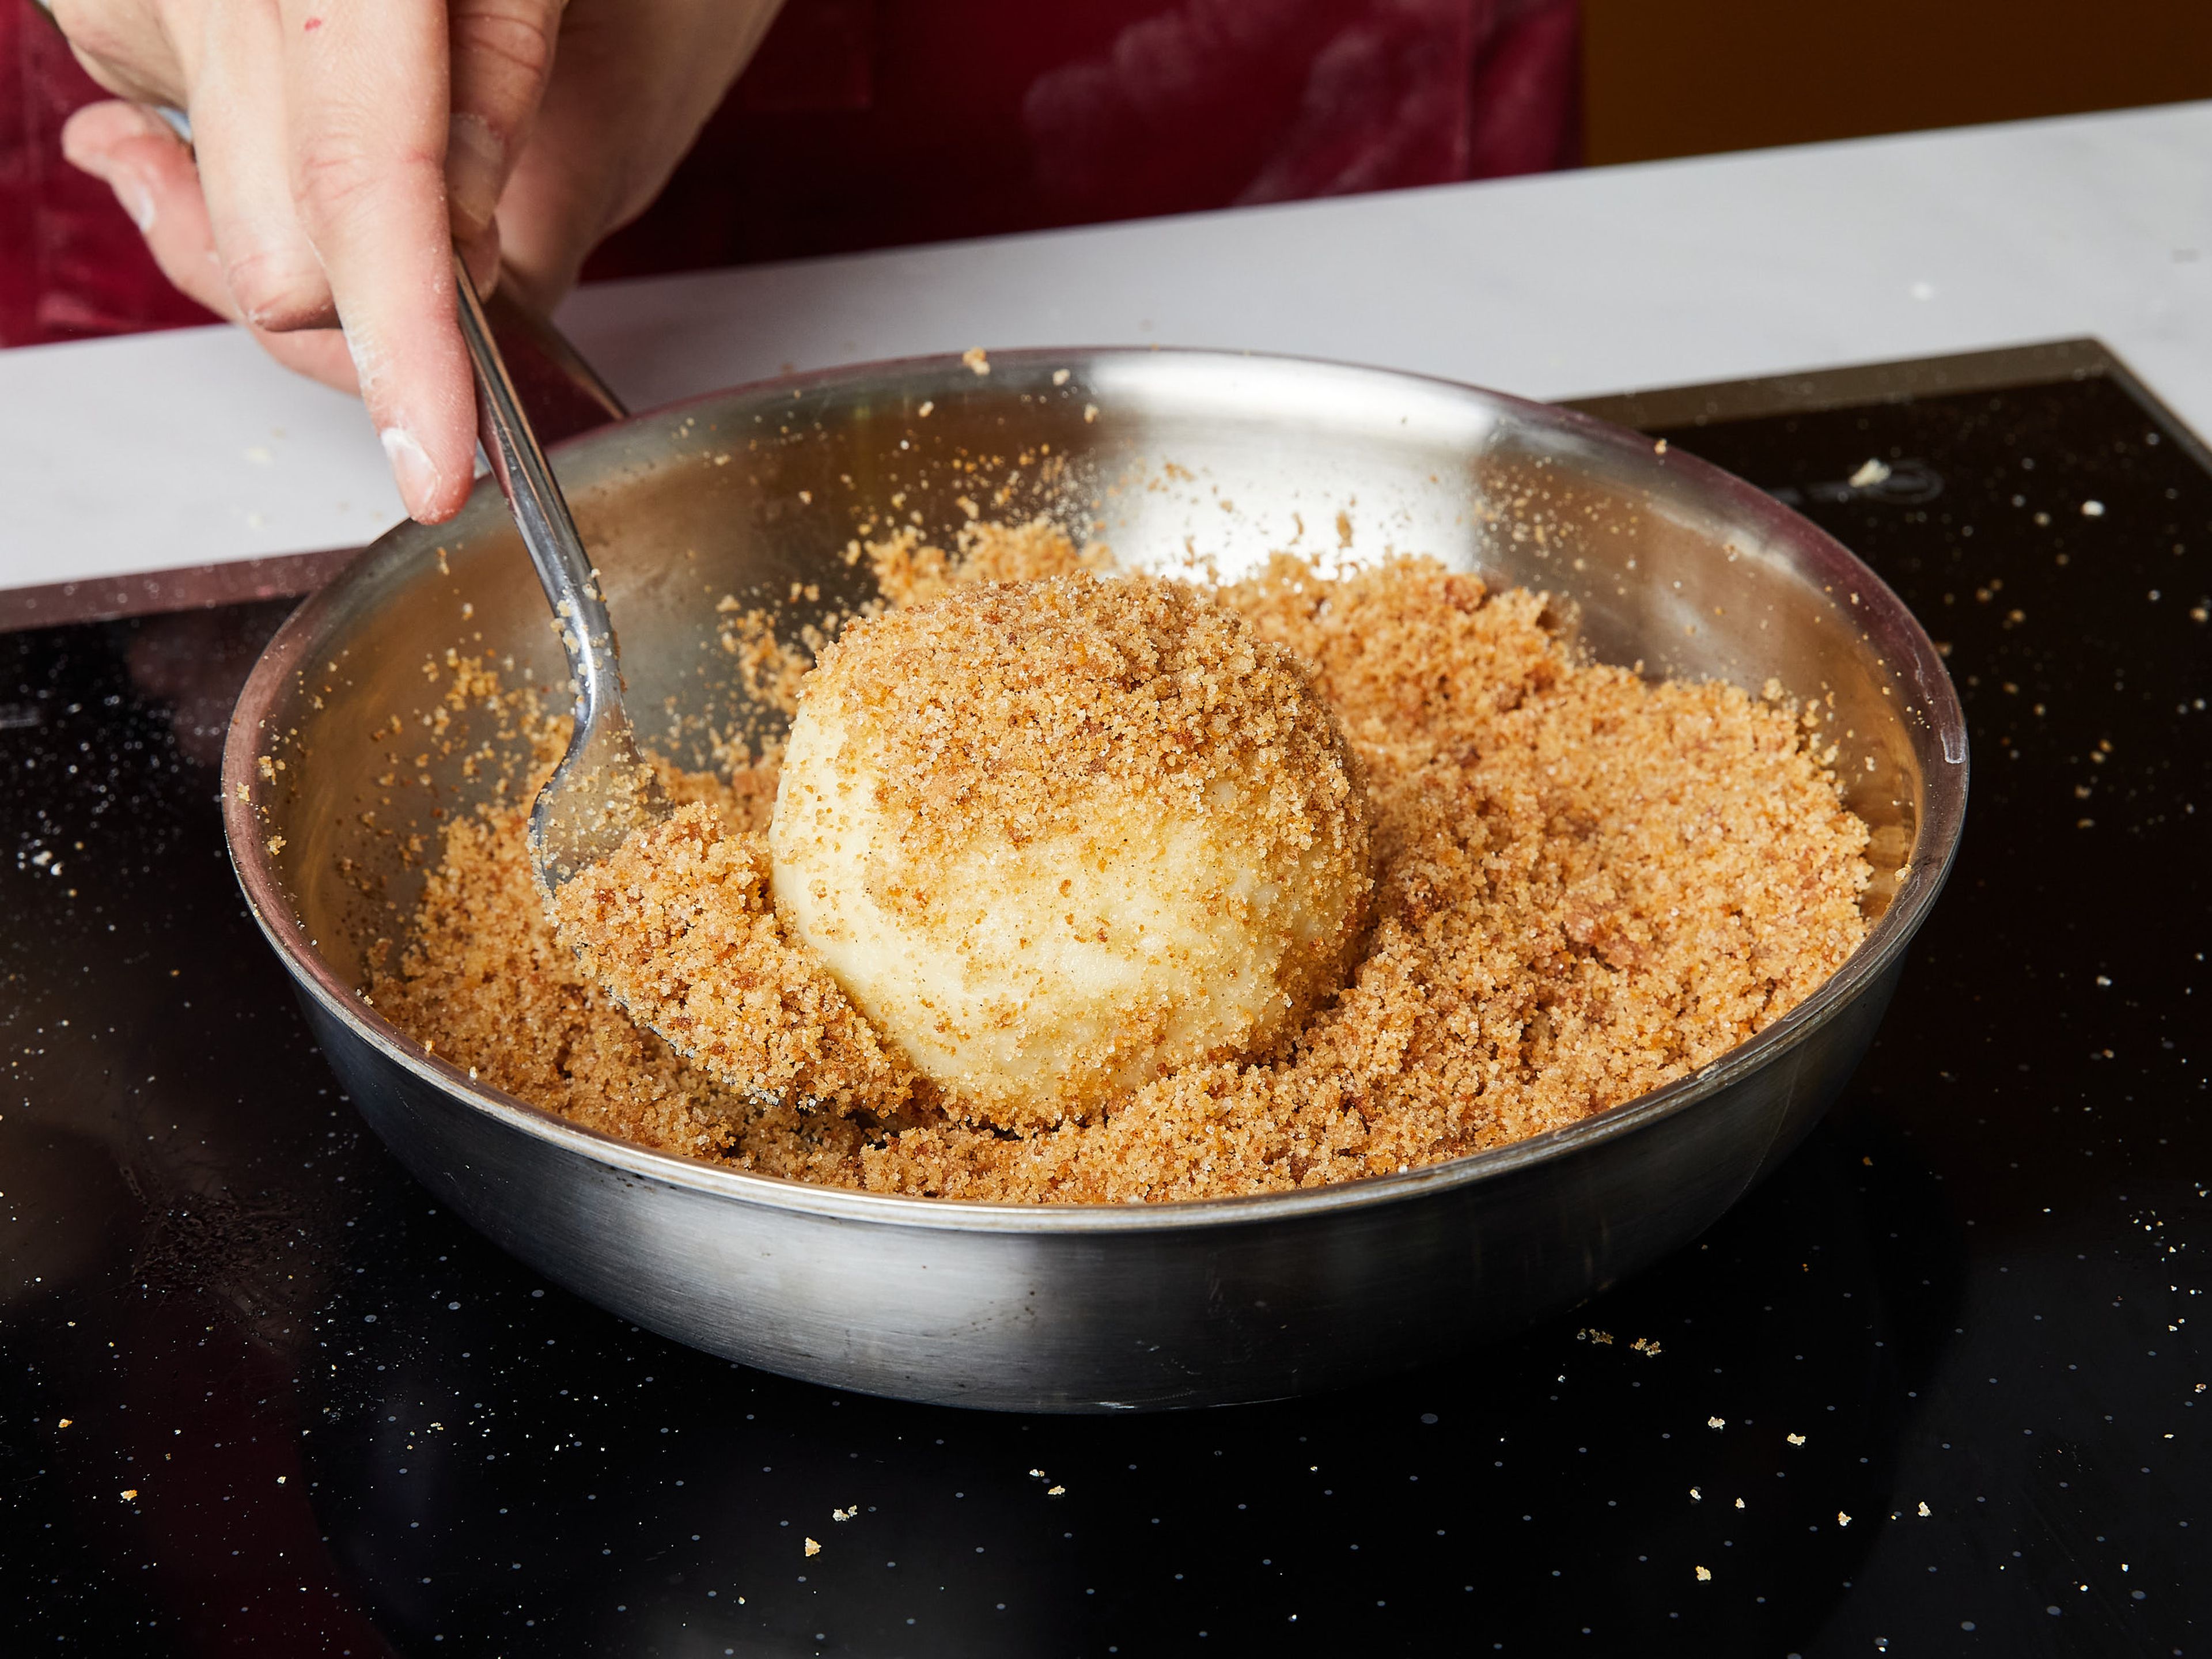 Meanwhile, melt the butter in a frying pan. Add breadcrumbs, sugar and cinnamon and fry until golden brown. Remove the dumplings from the water with the help of a cooking spoon, drain well and then roll in the butter-cinnamon crumbs. Sprinkle with a little powdered sugar and serve while still warm.